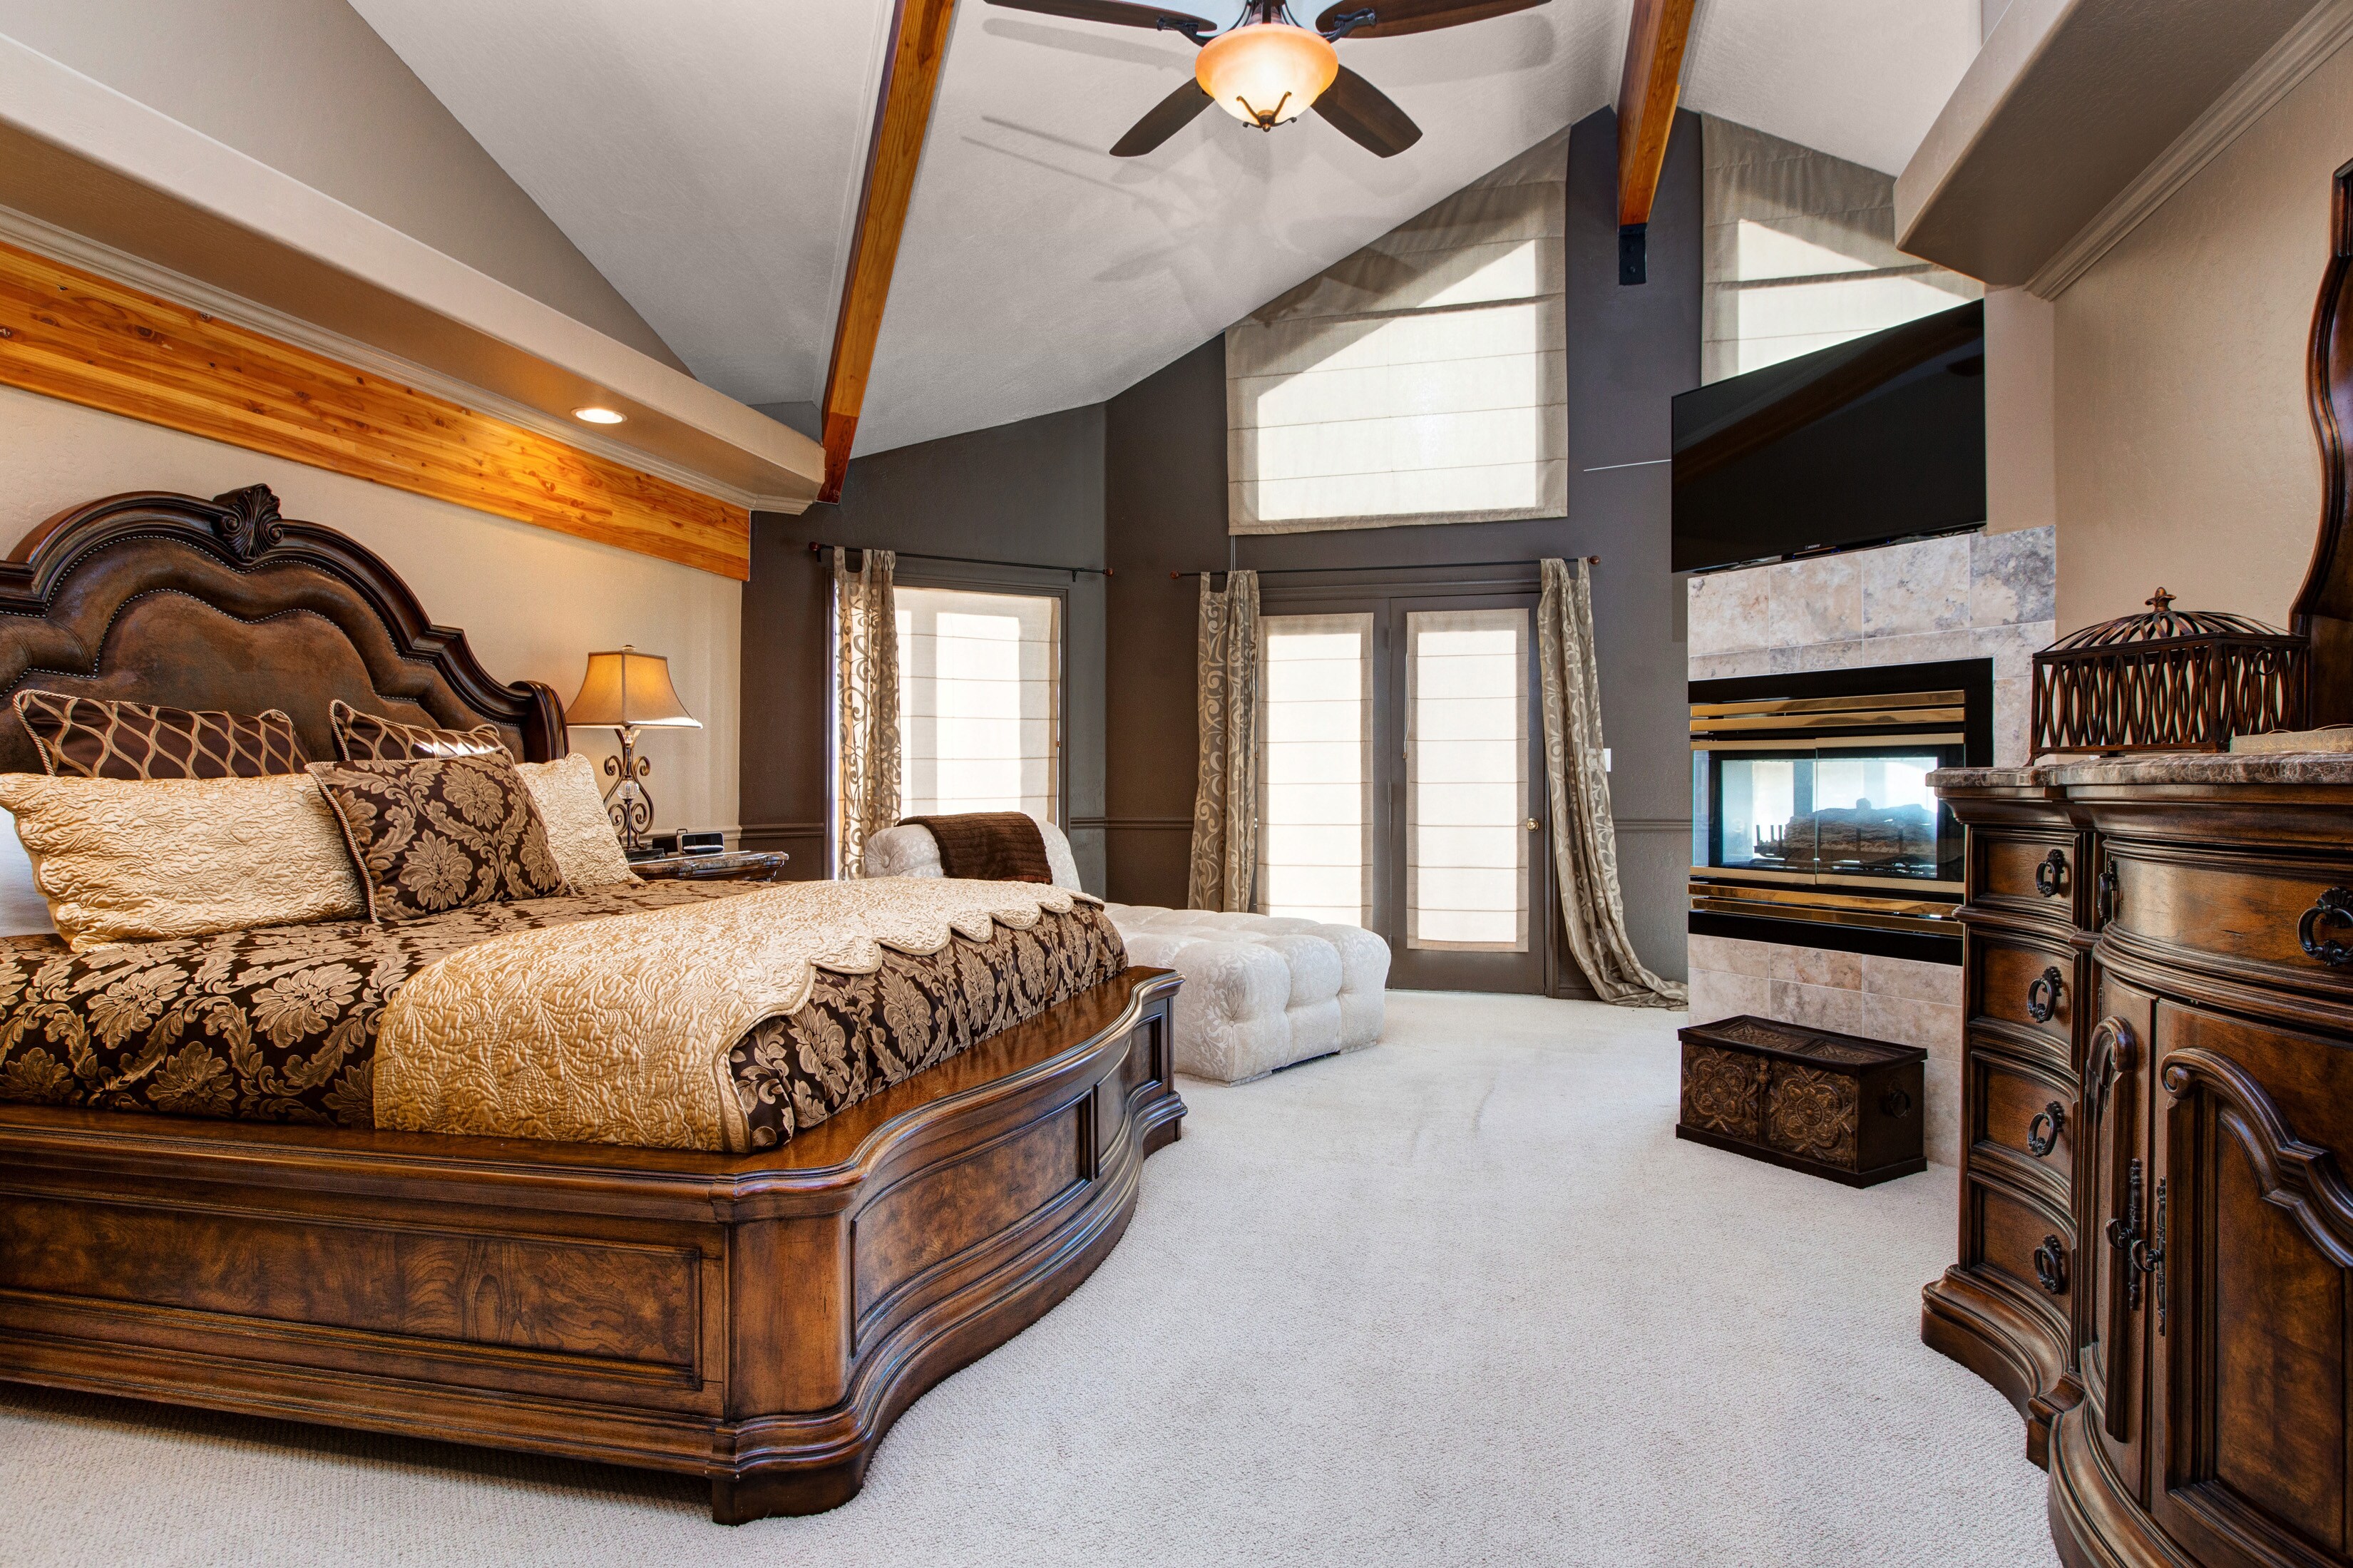 The magnificent master bedroom has a king-size bed, chaise lounge, and a 50” flat-screen